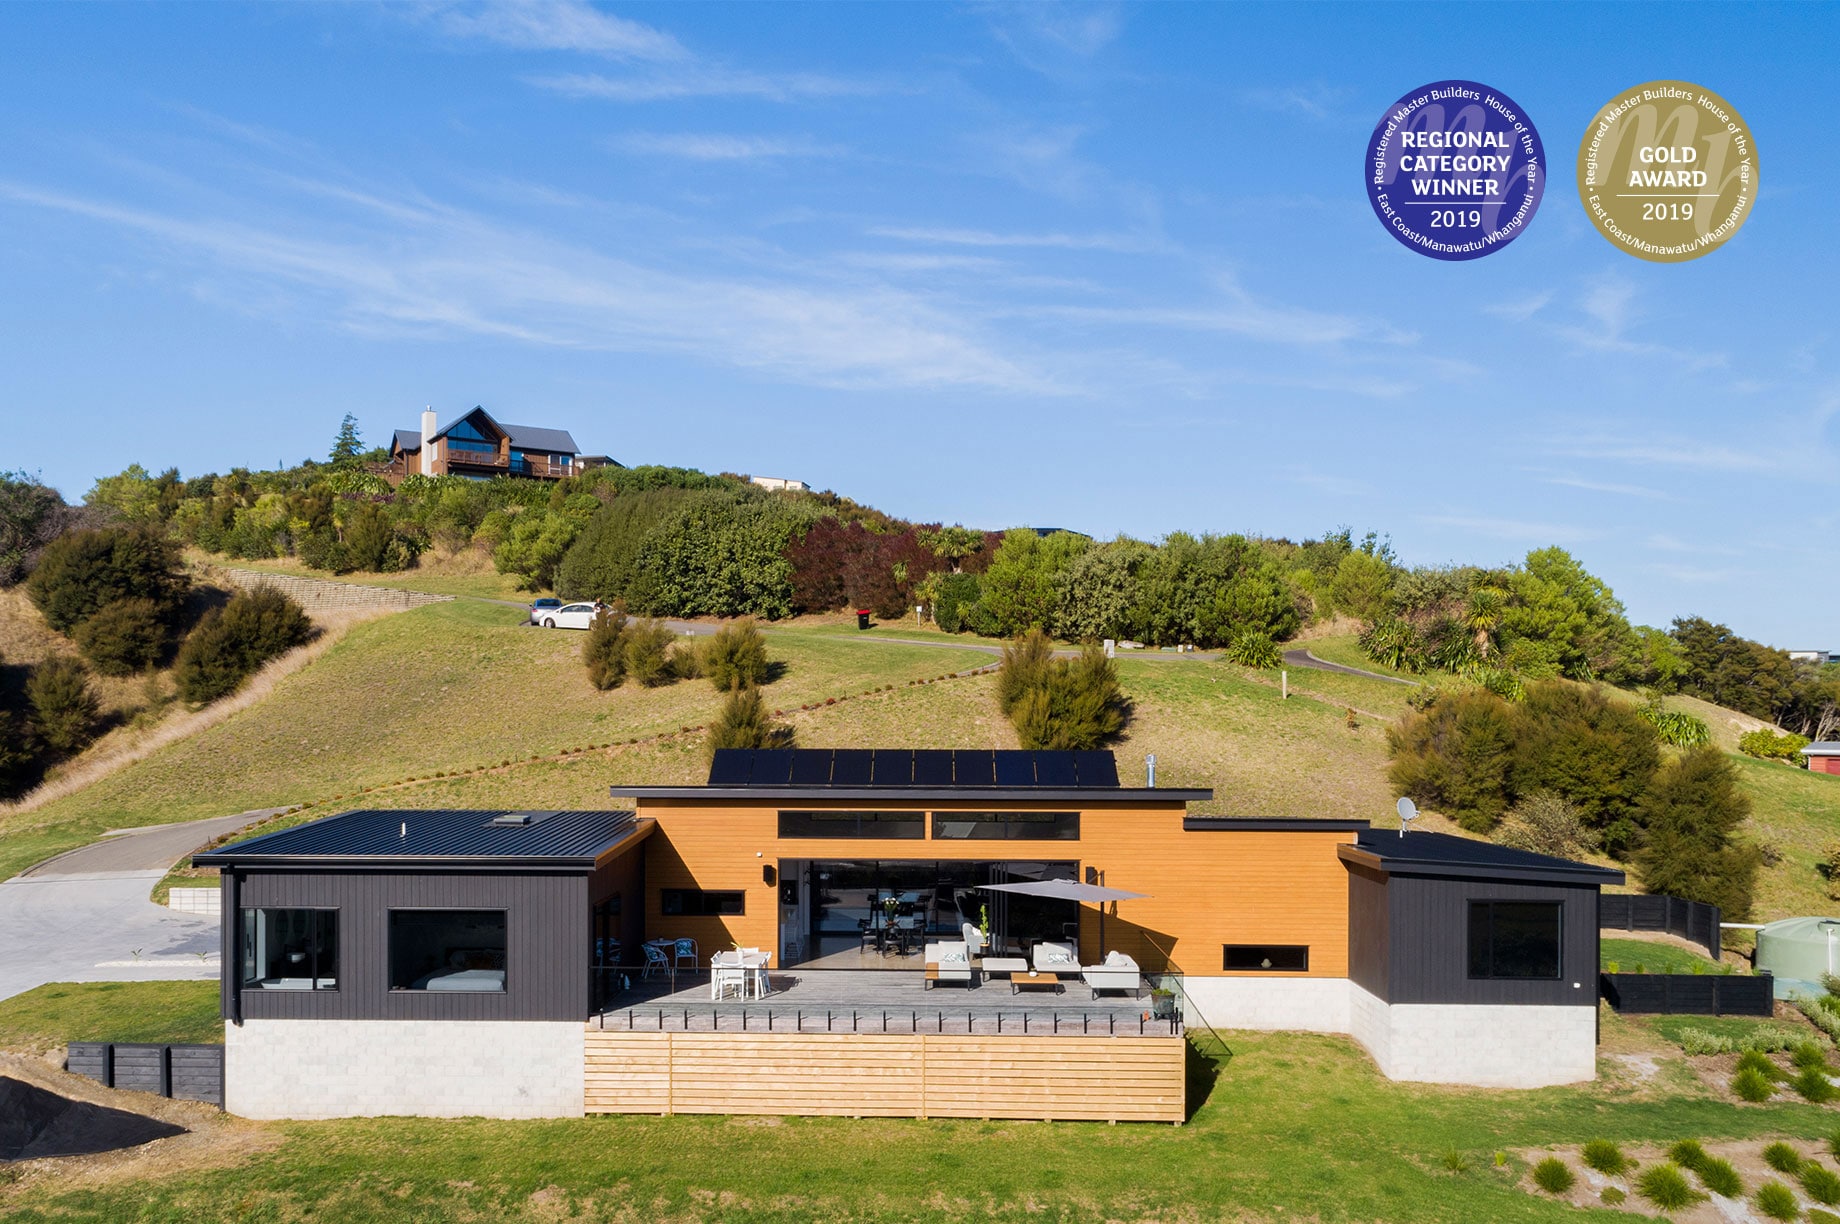 Award winning rural home elevated view of exterior